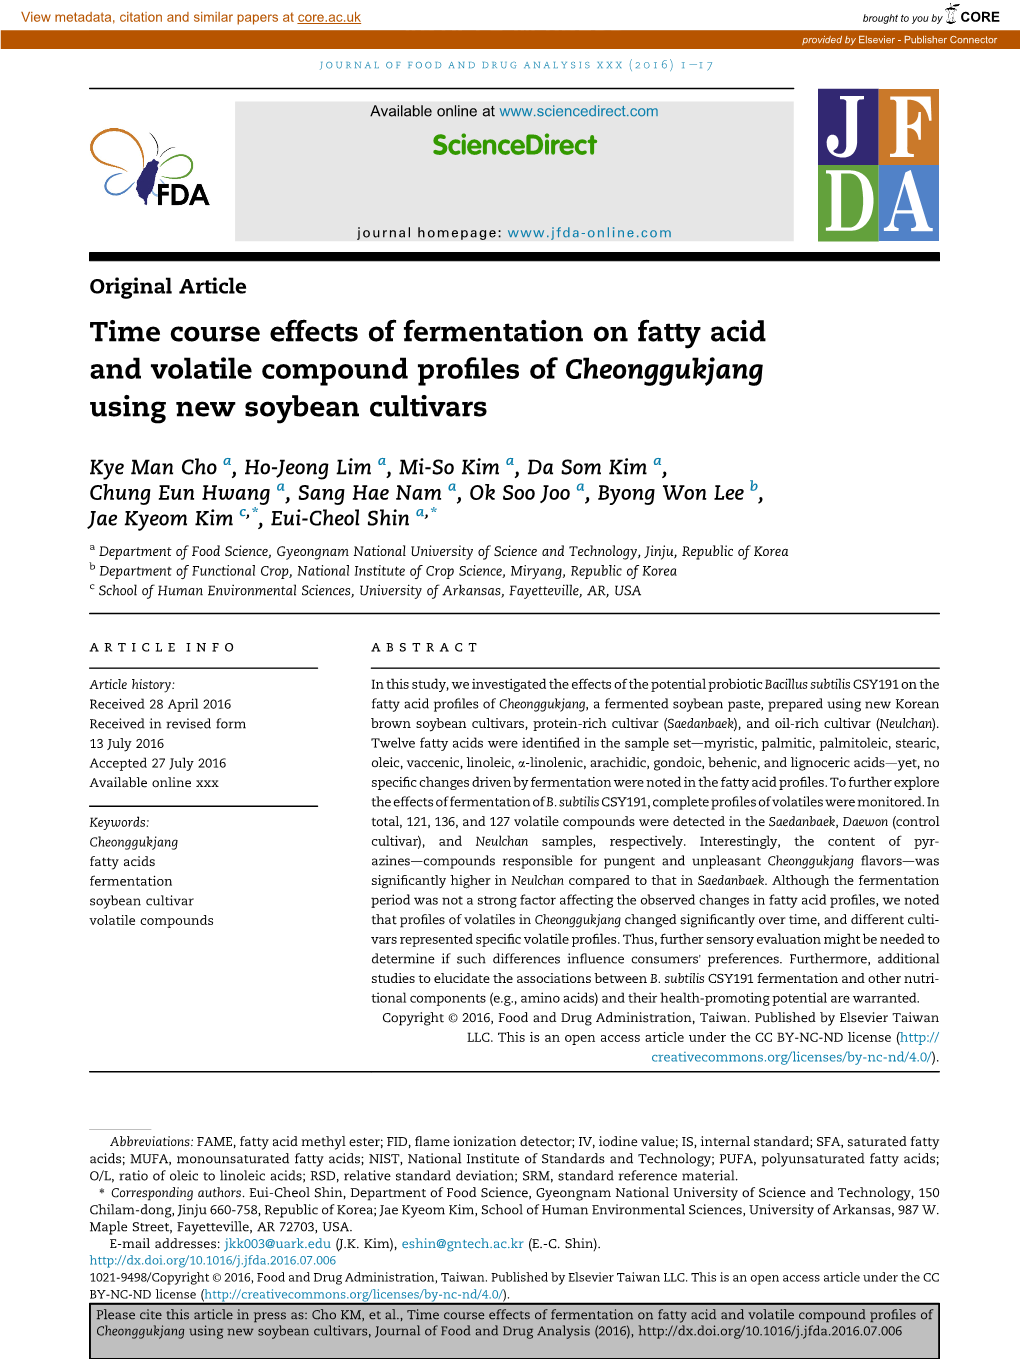 Time Course Effects of Fermentation on Fatty Acid and Volatile Compound Proﬁles of Cheonggukjang Using New Soybean Cultivars